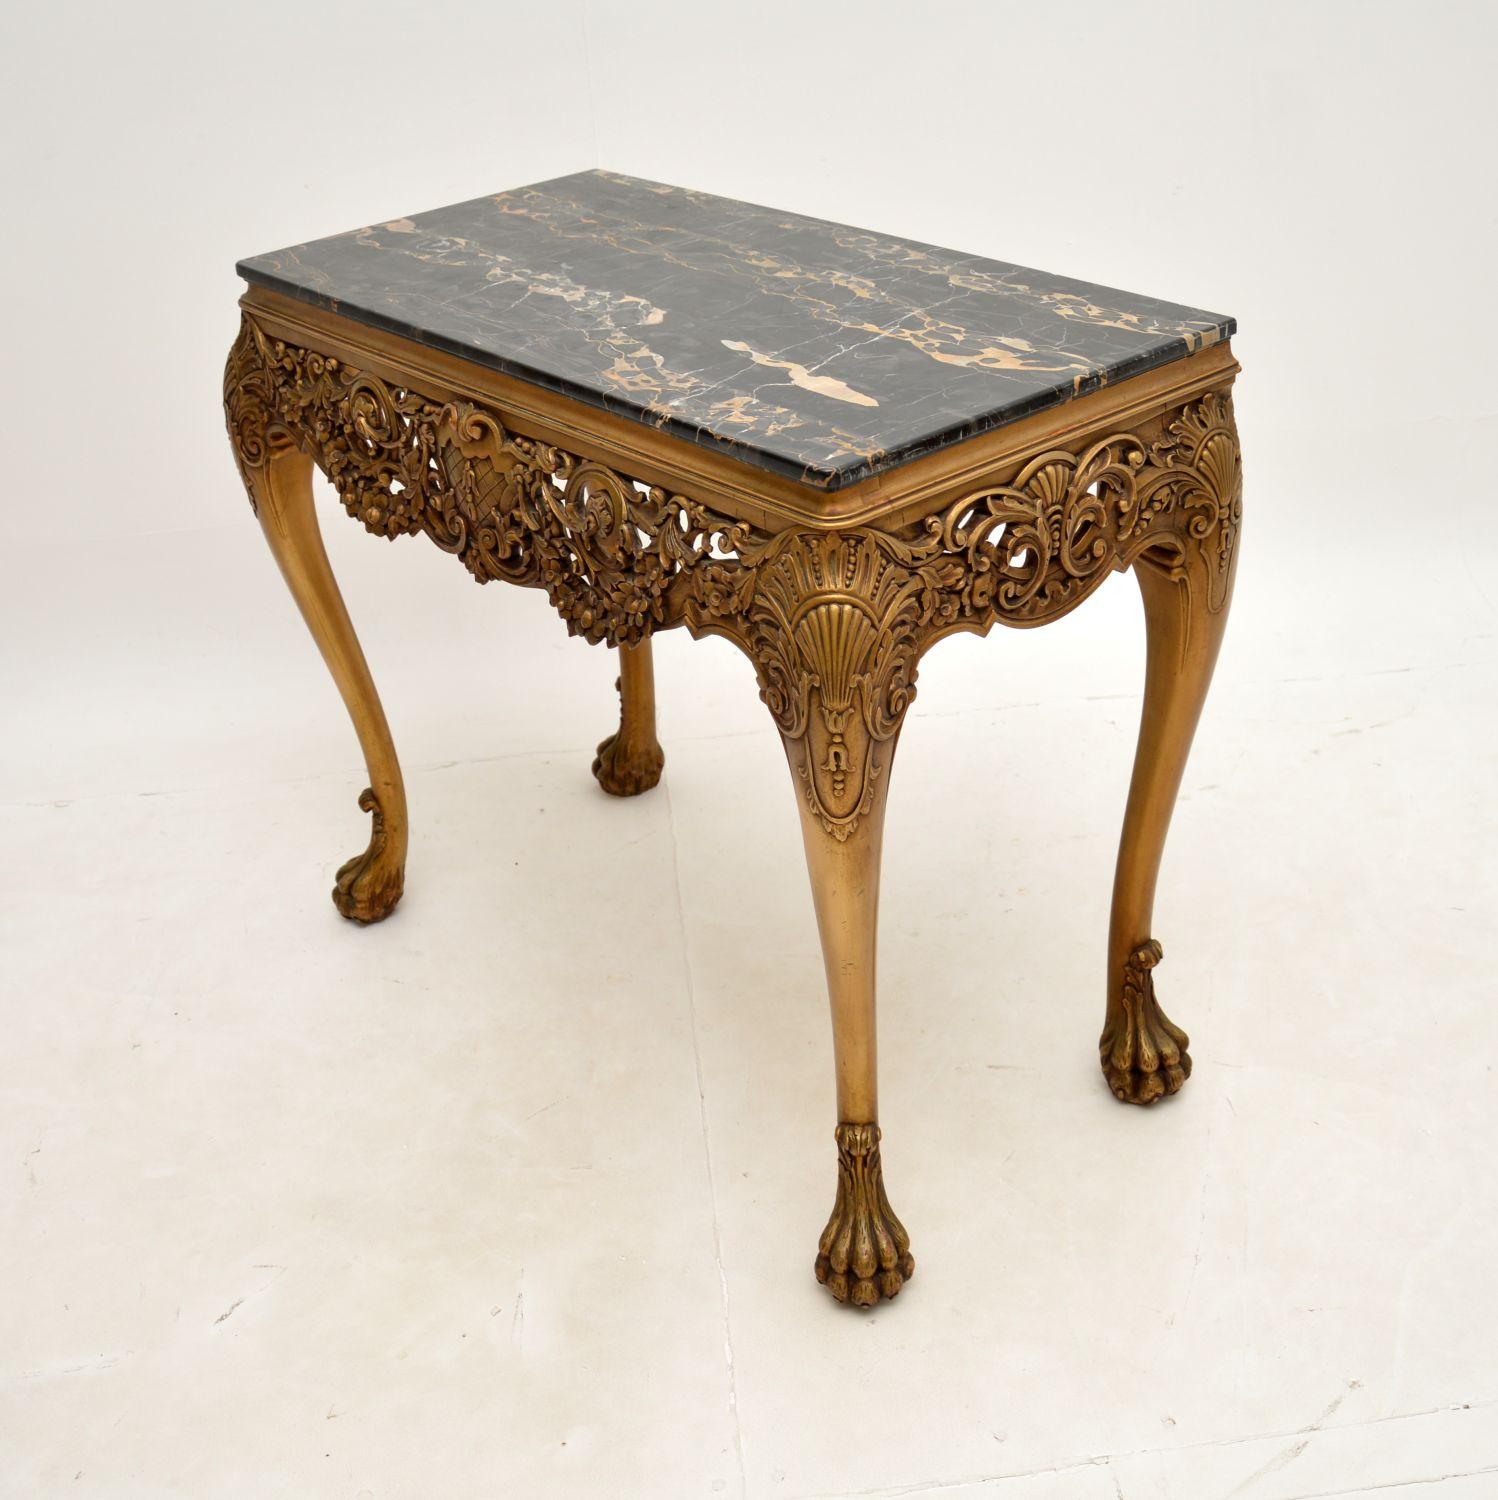 British Antique William Kent Style Marble Top Gilt Wood Side Table For Sale